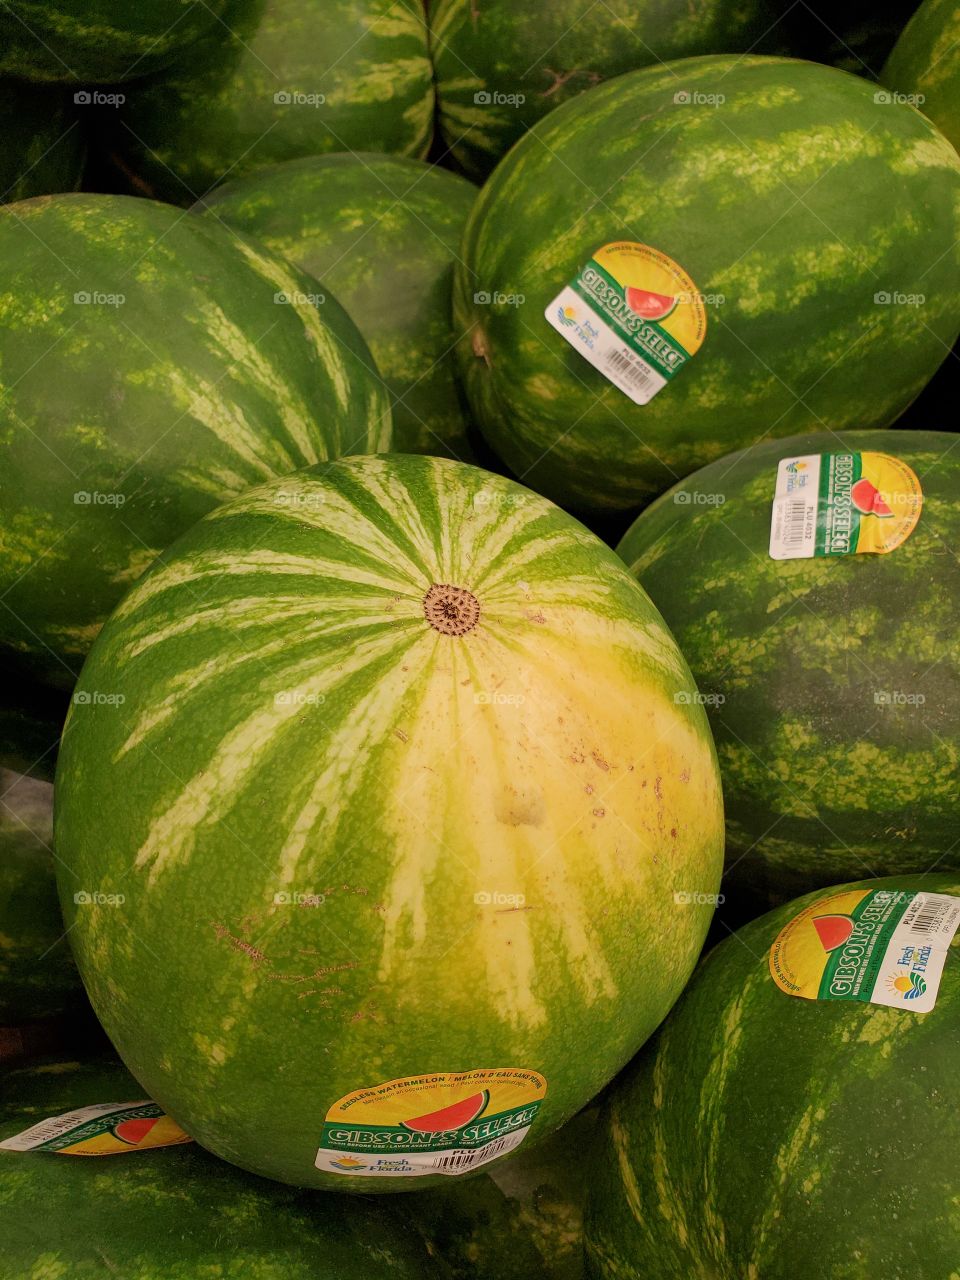 watermelons for sale!